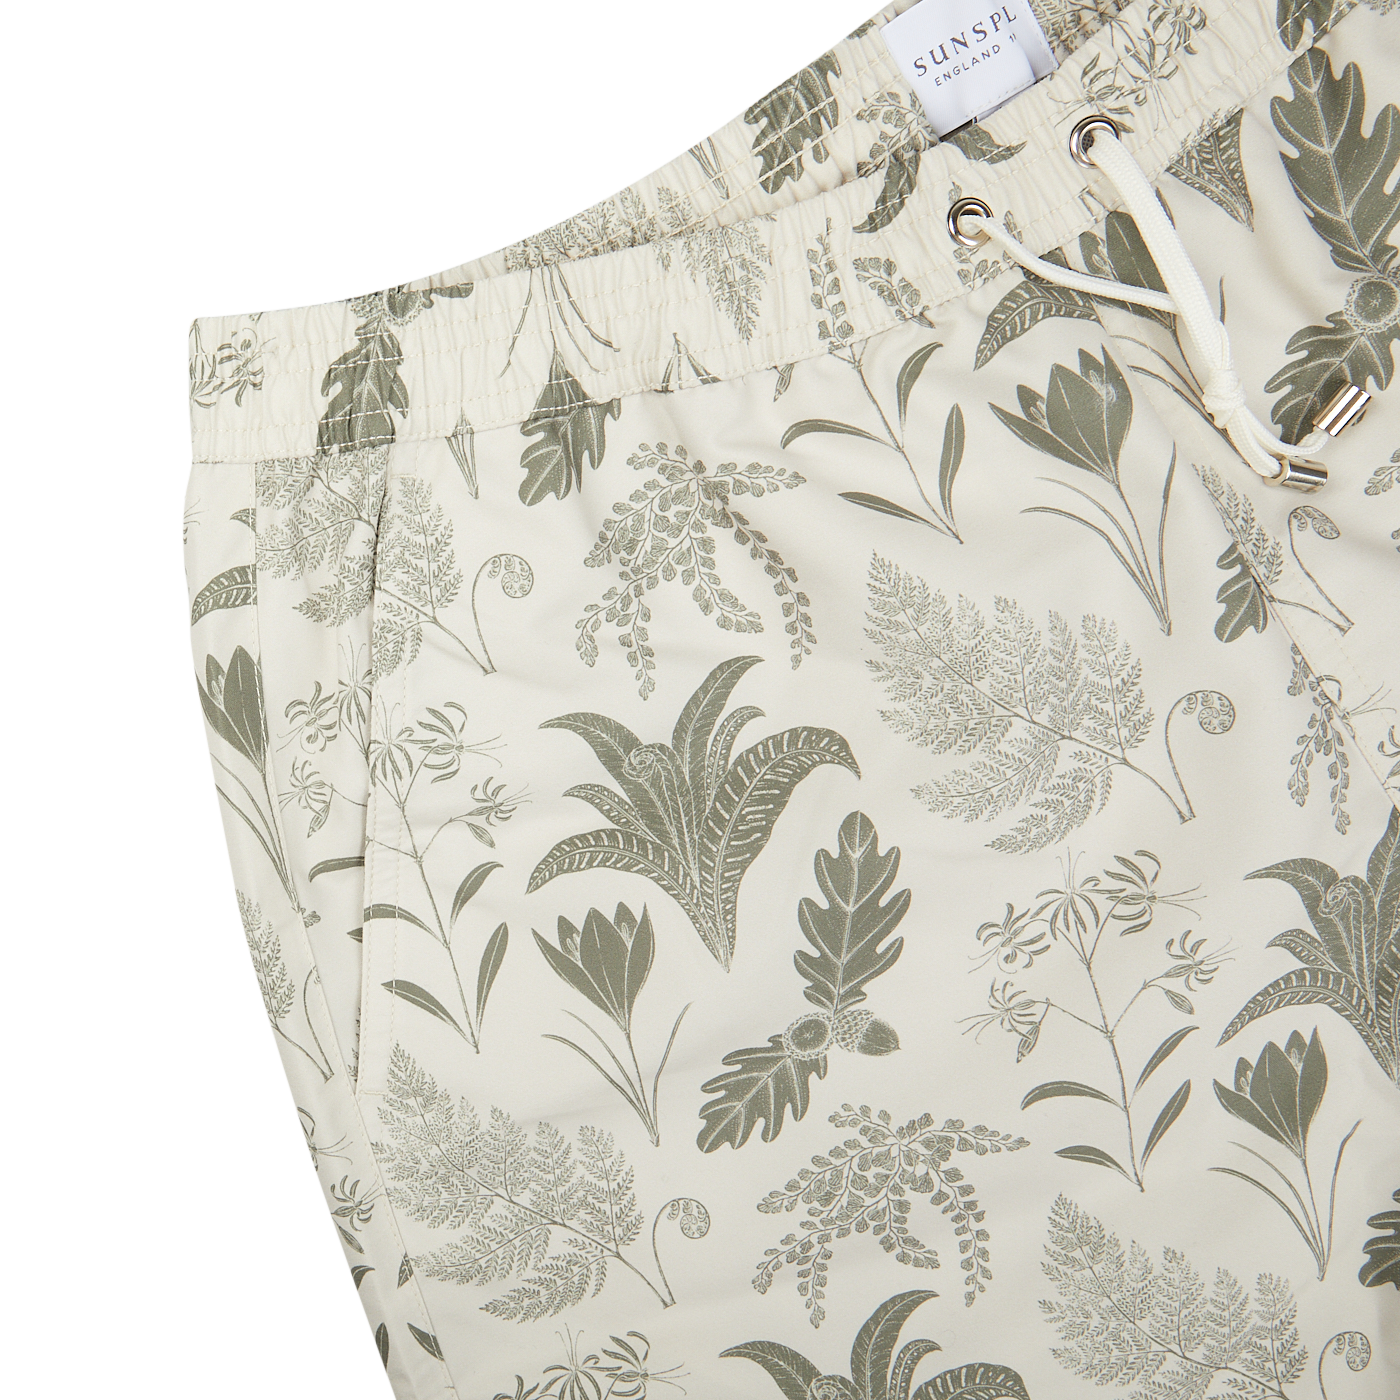 A pair of Sunspel Ecru Katie Scott Drawstring Swim Shorts with a green and white print.